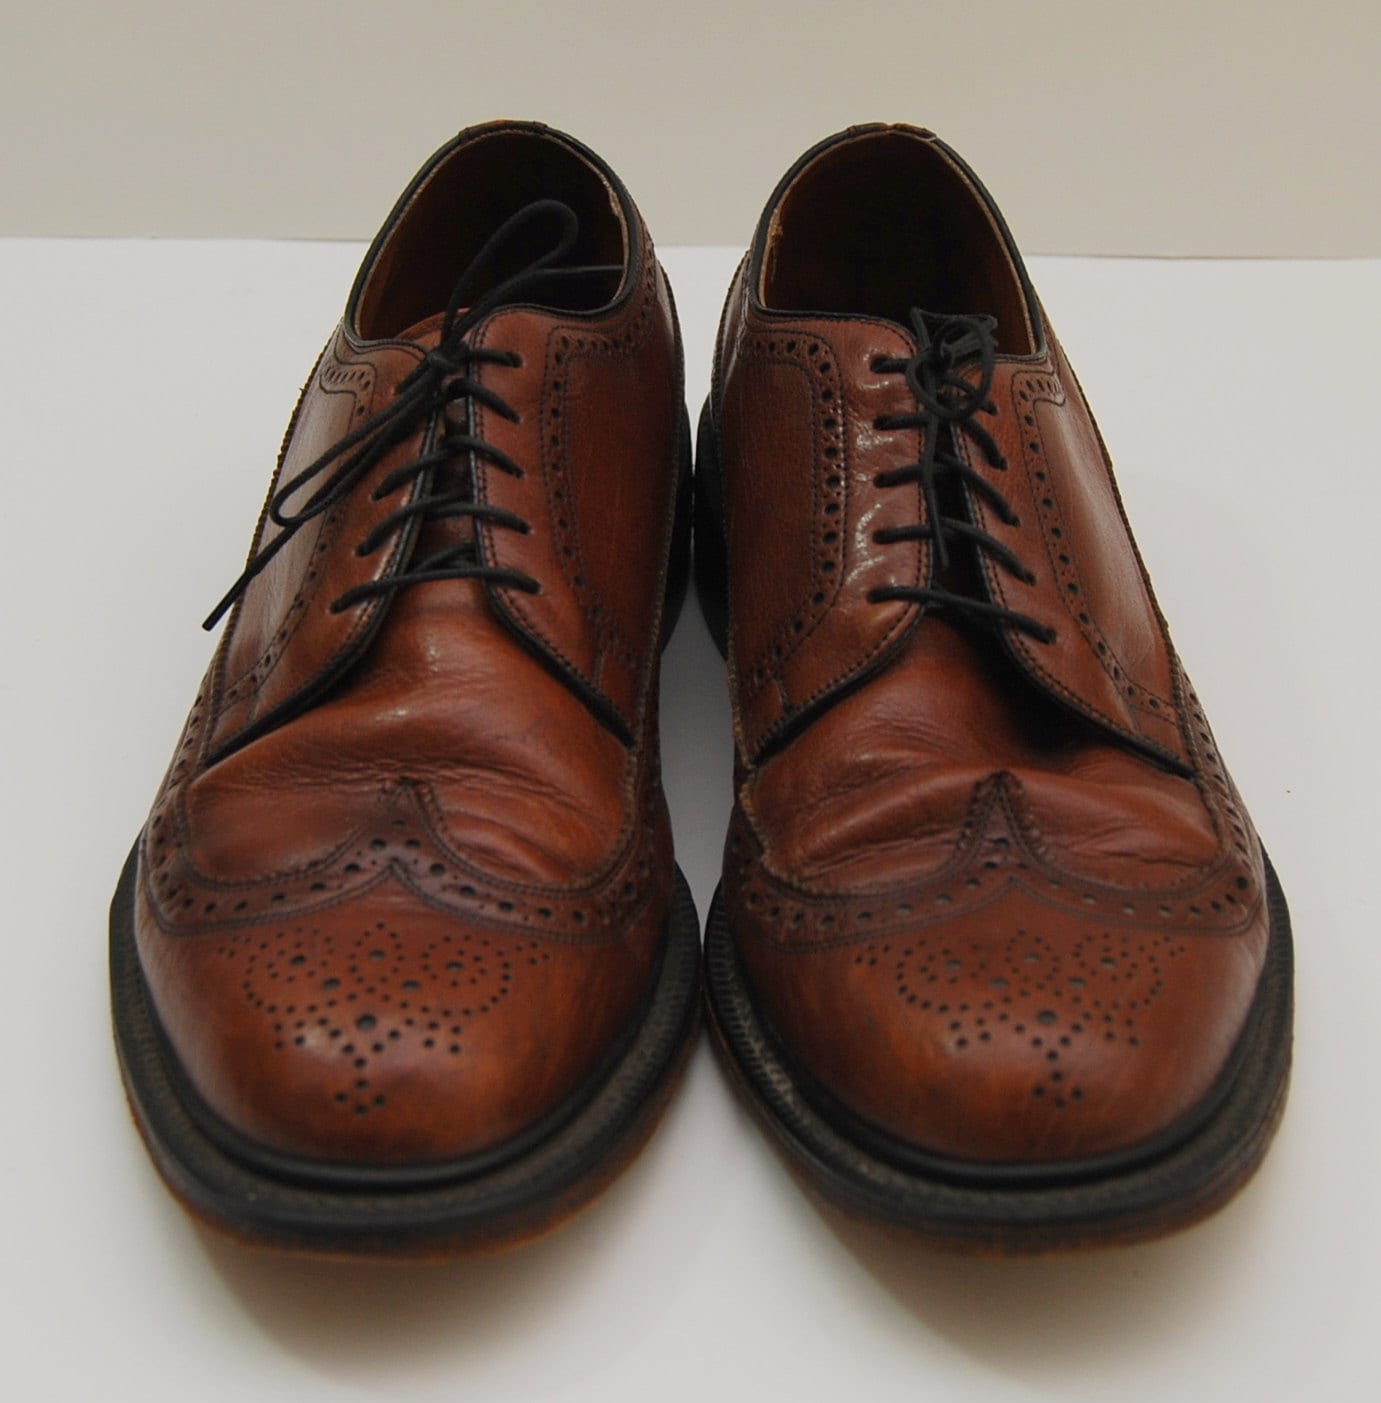 mens 1970s brown leather wingtop oxford shoes by LivedIn on Etsy